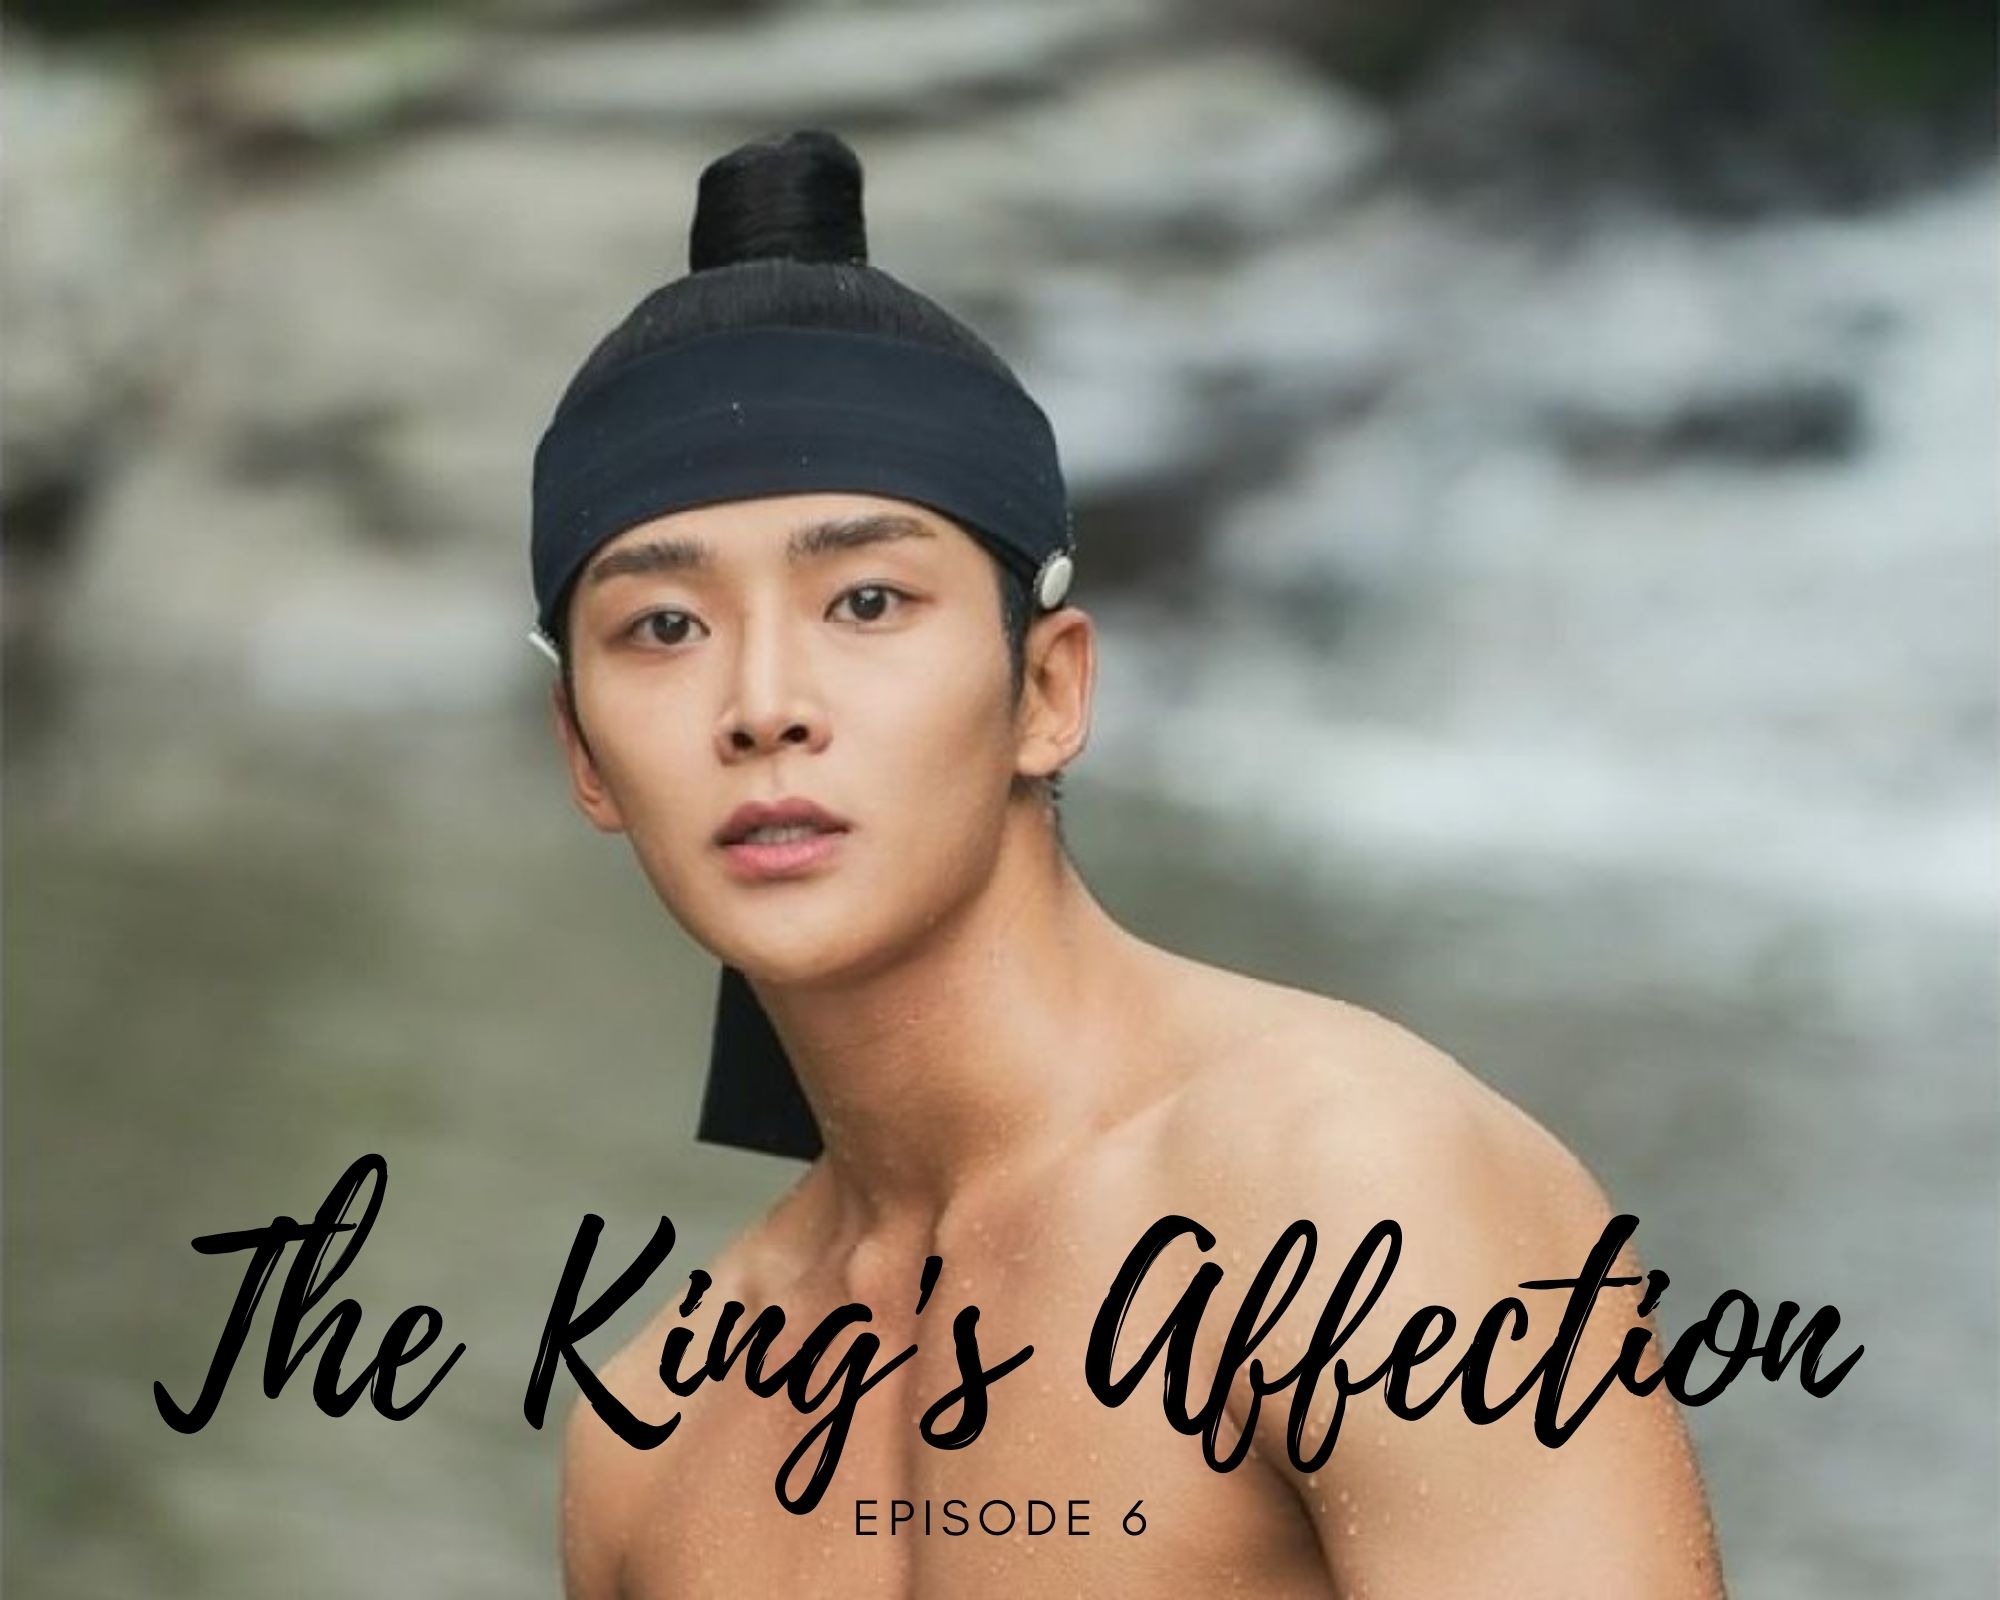 The King's Affection Episode 6 Release Date